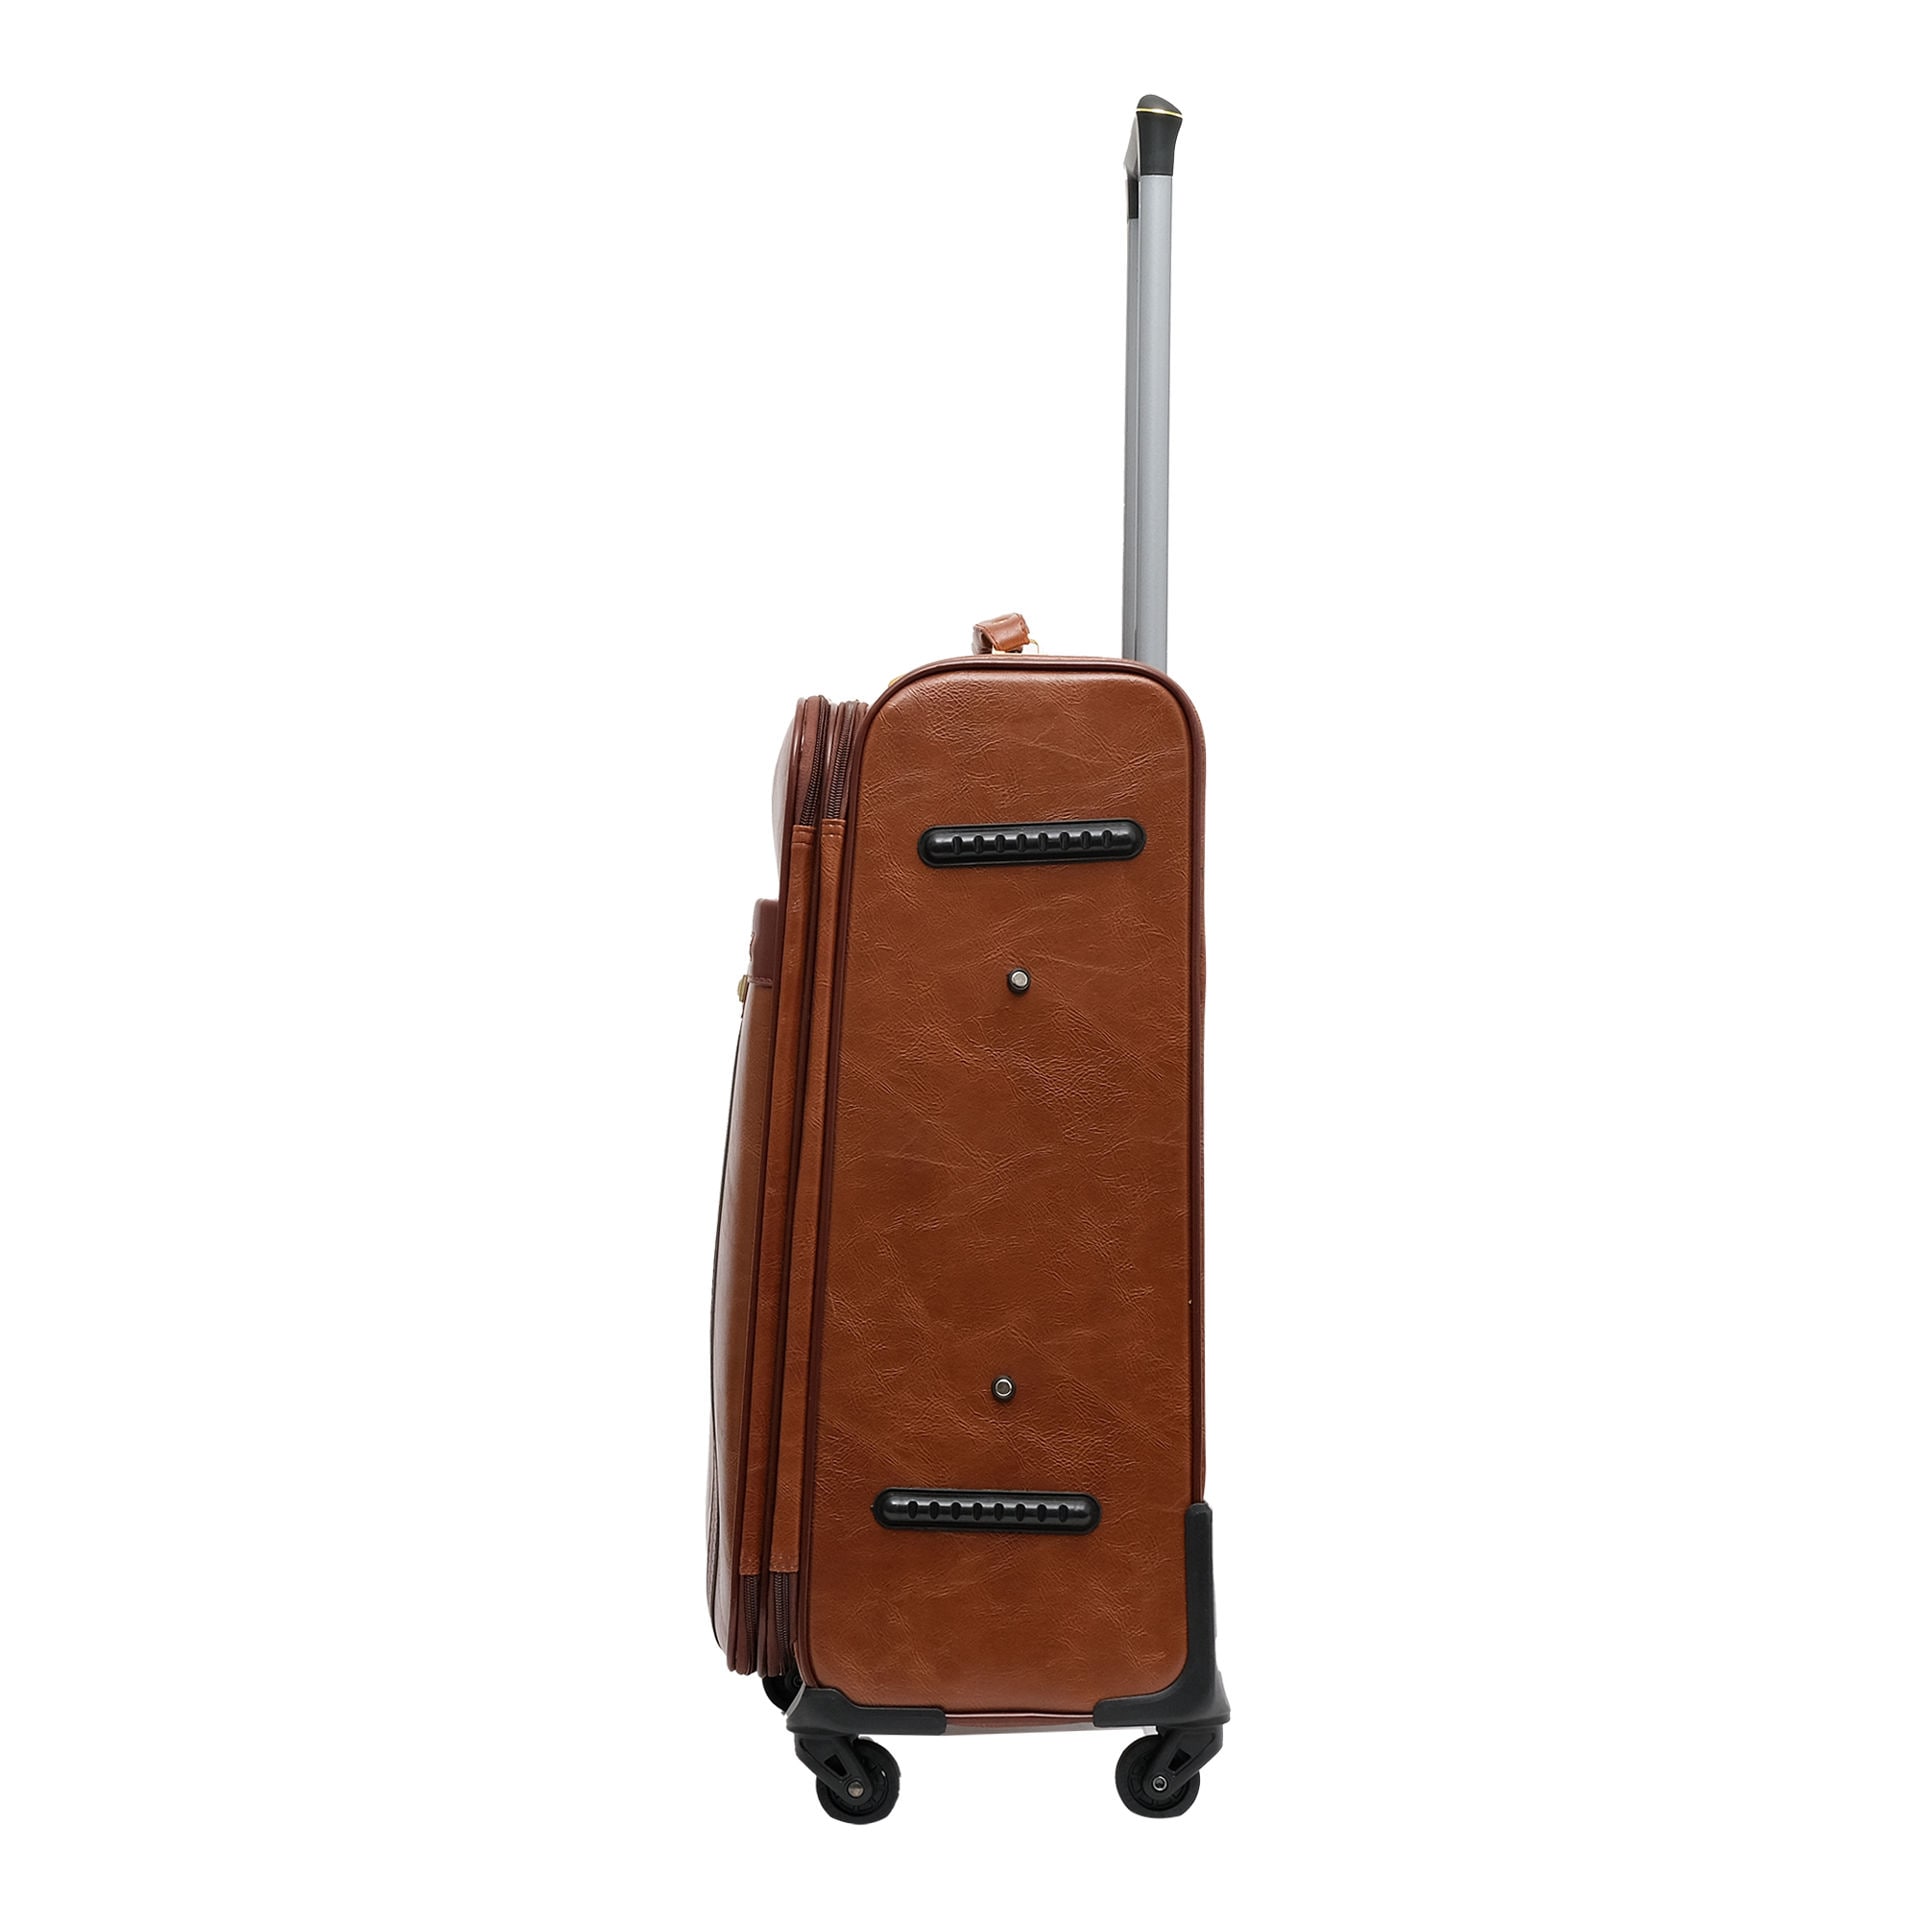 Royal Travel PU Leather Trolley Bag Near Me From Best E-commerce | Best Royal Travel PU Leather Trolley with Number Lock in Dubai, UAE